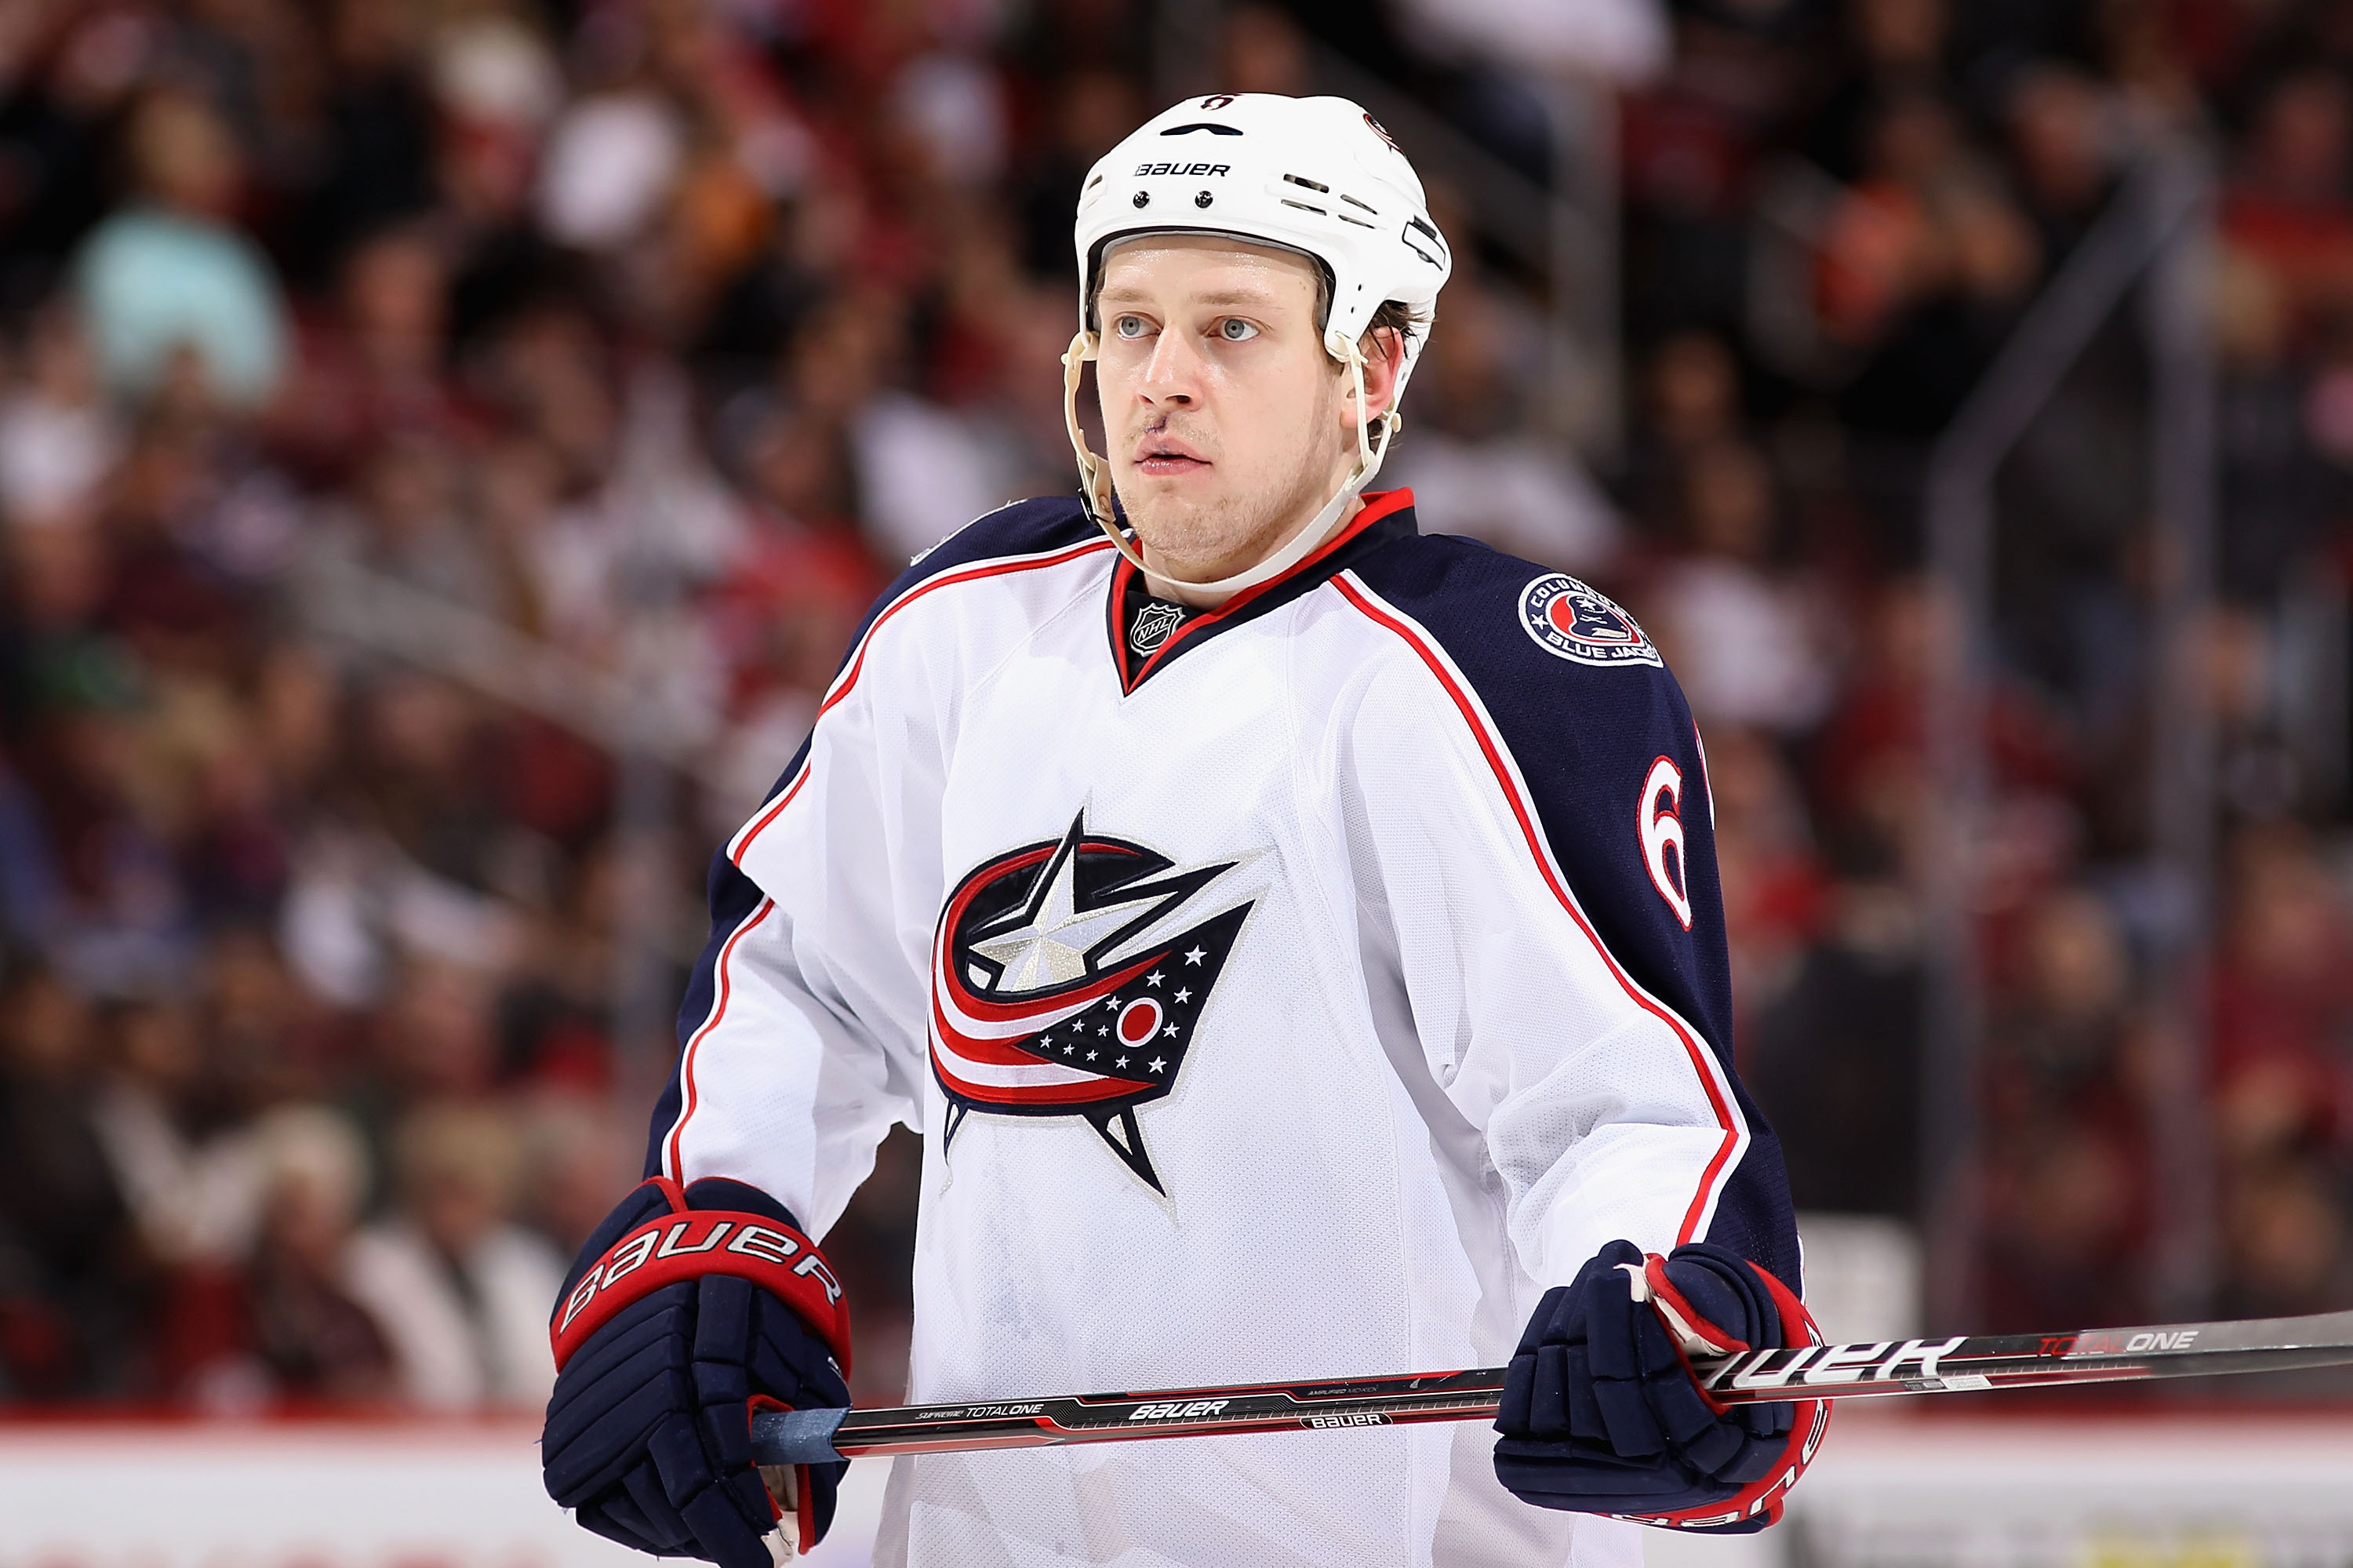 Columbus Blue Jackets 2000-01 roster and scoring statistics at